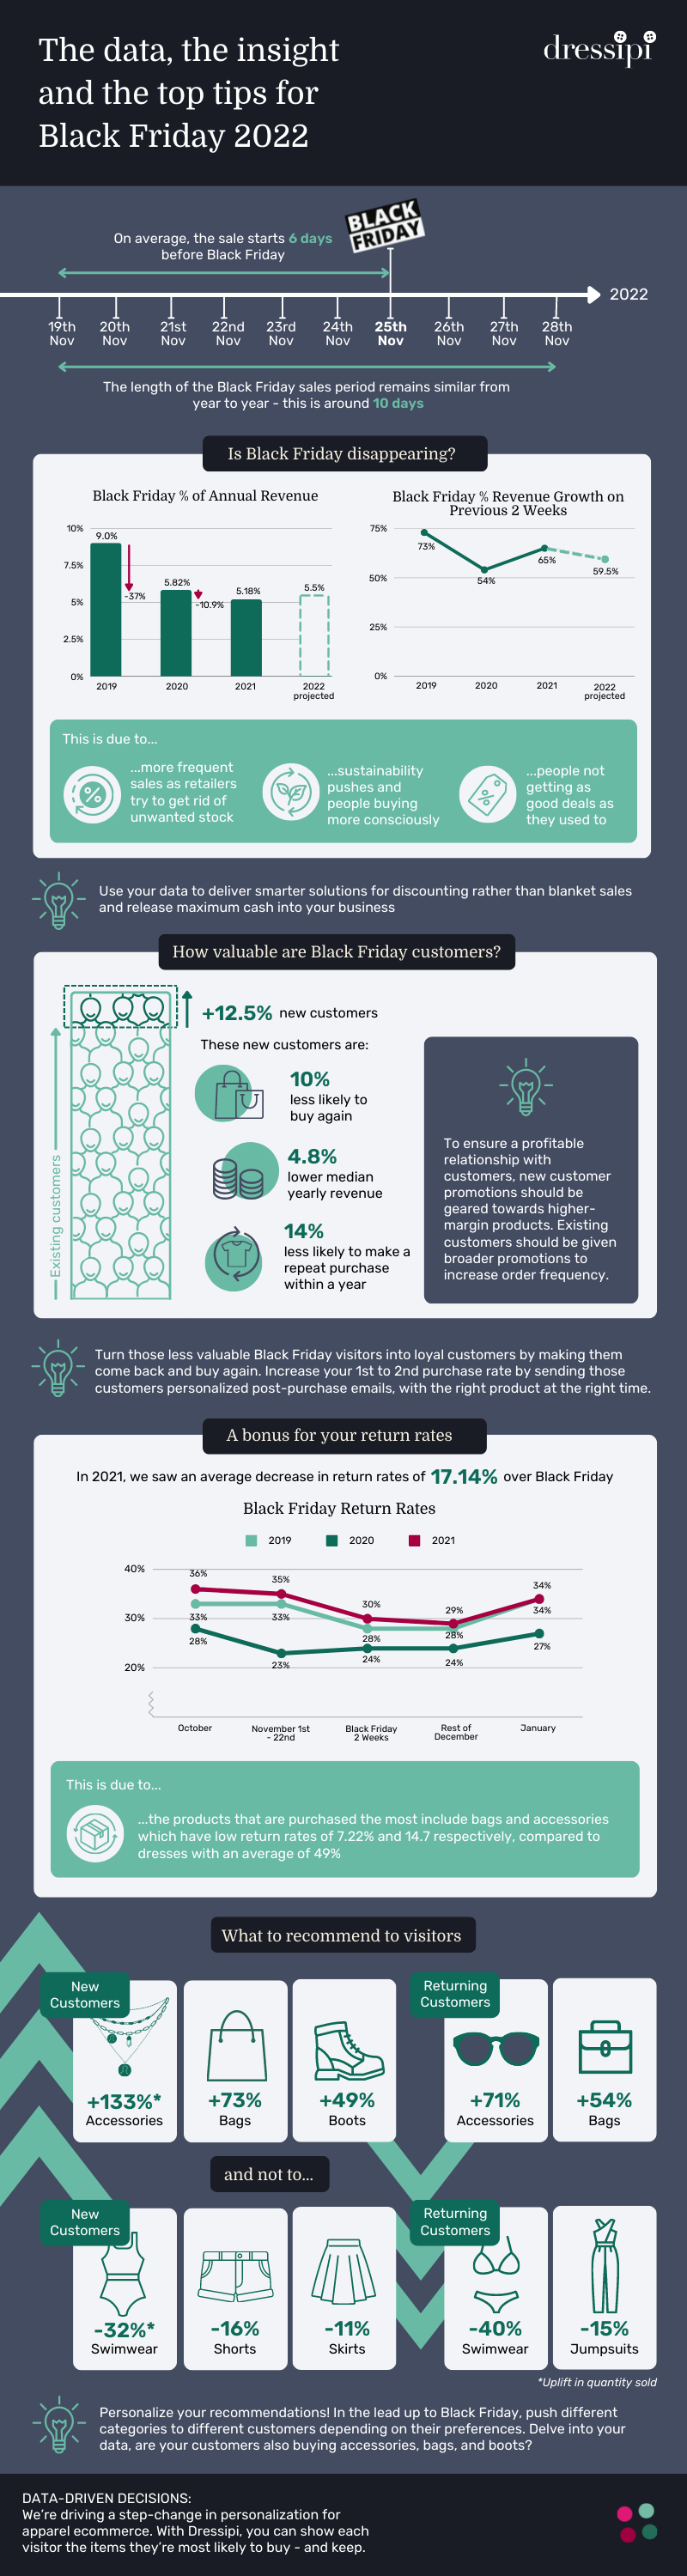 Infographic of the data, the insight and the top tips for Black Friday 2022
